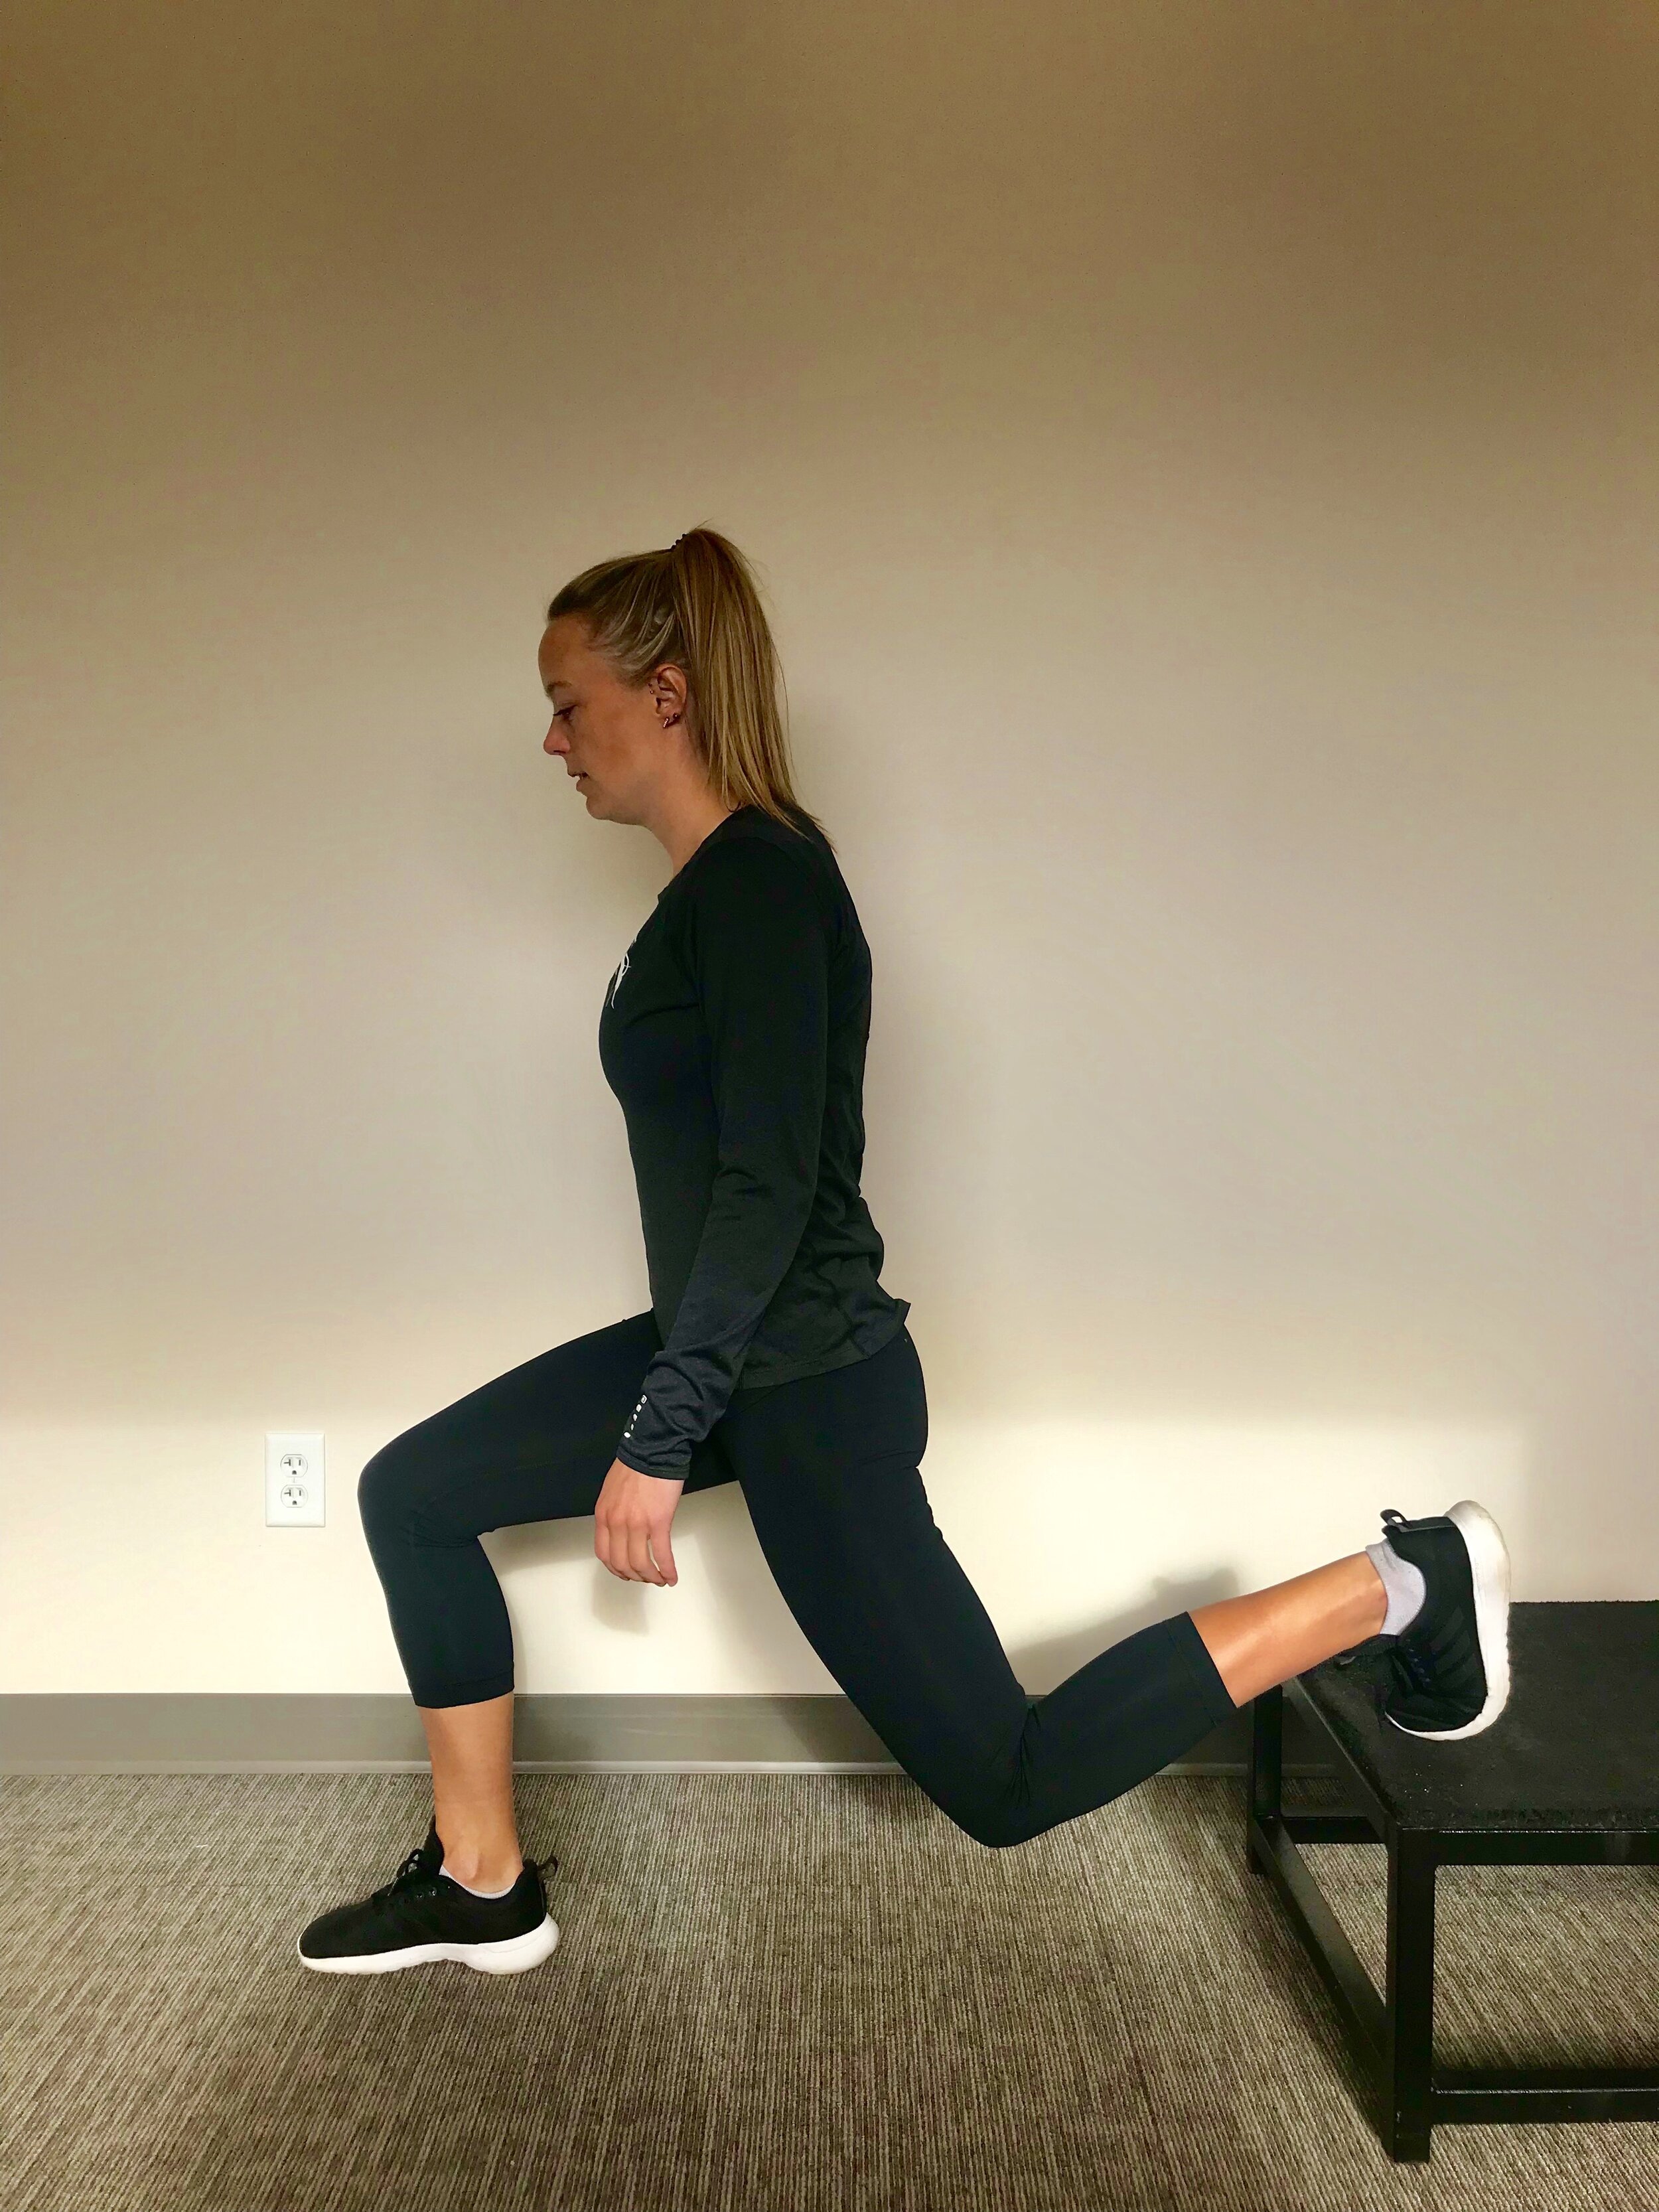 Put your back foot up on a stool; drop down into a split lunge, front knee stays right over toe. Repeat 15-20 times each leg.